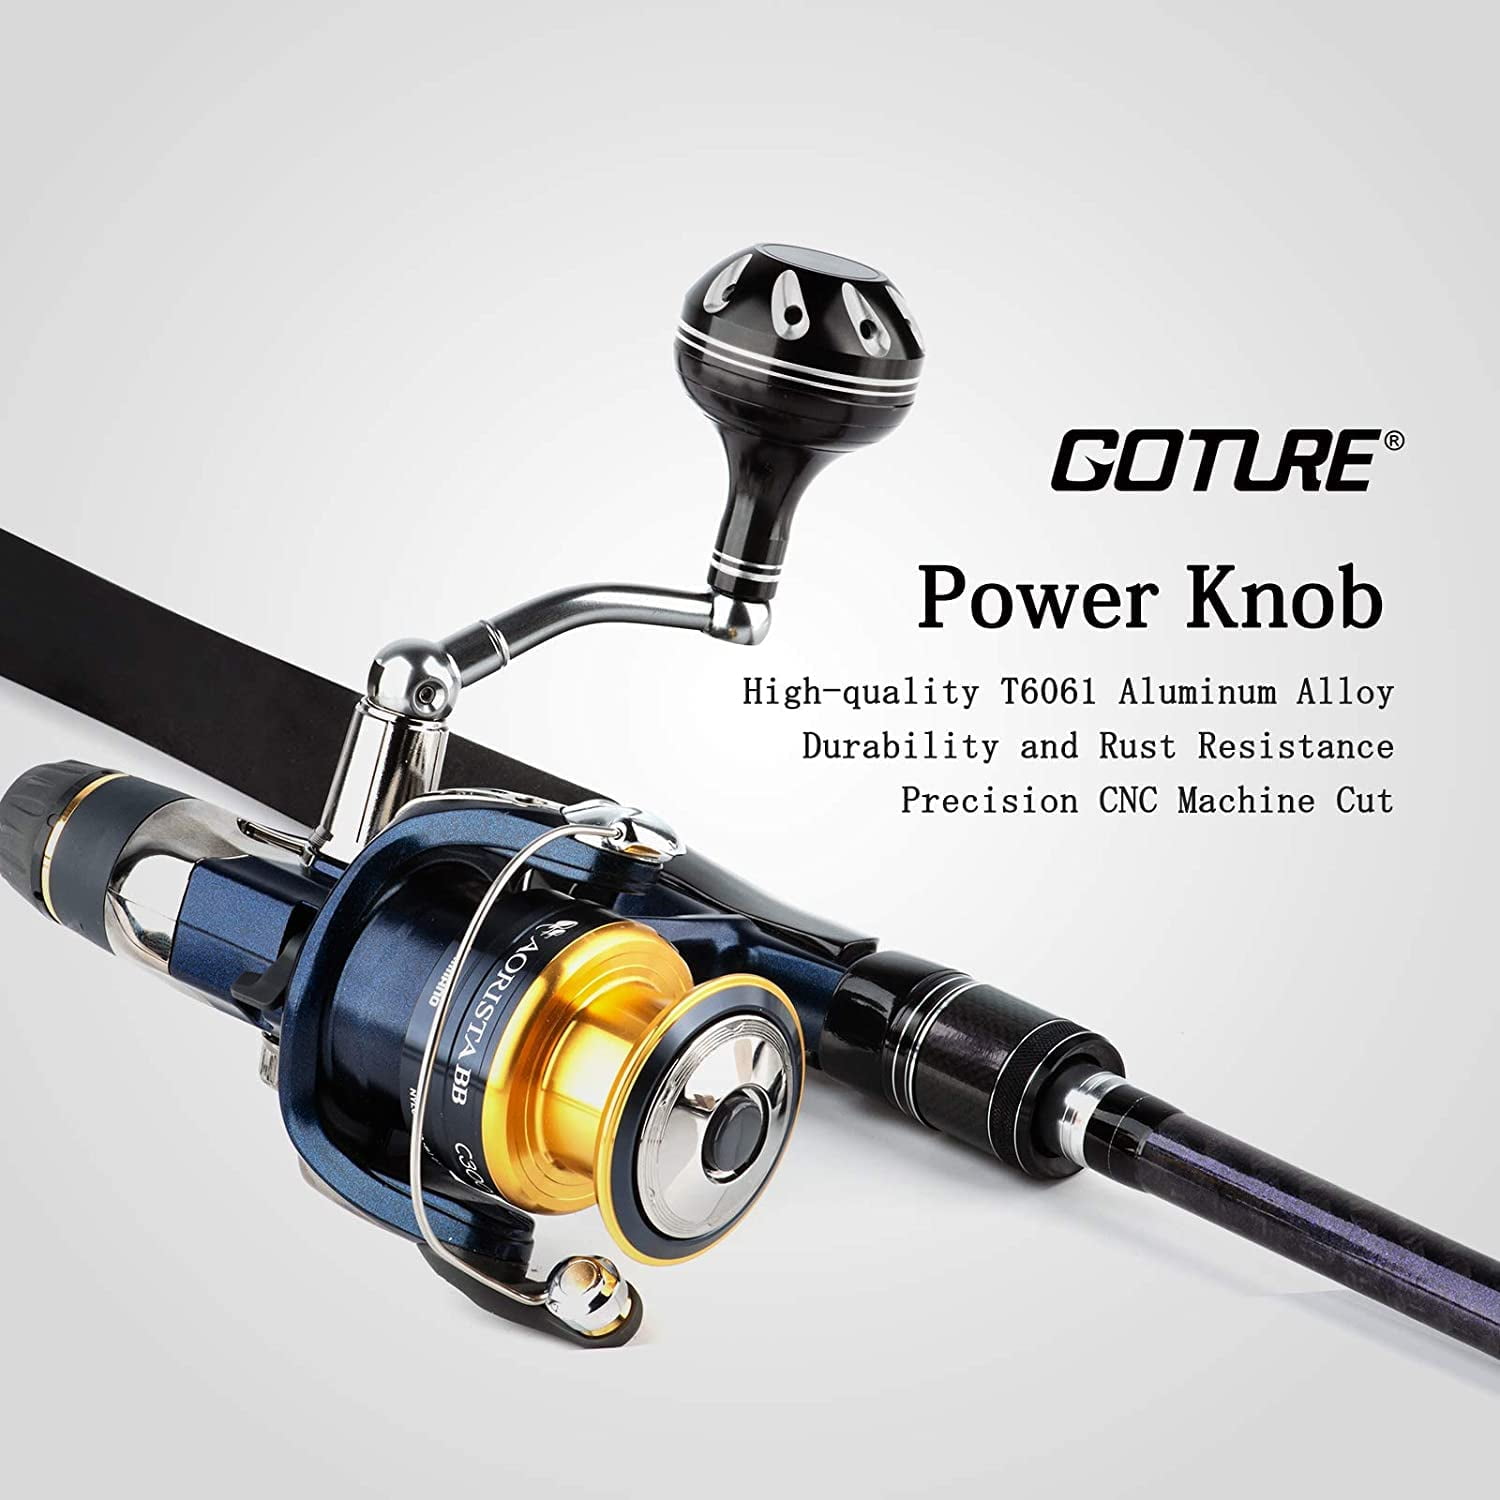 Jetshark 8000-12000 Long Cast Spinning Fishing Reel for Surf Casting Fishing  20kg Carbon Drag Ultra High Capacity Saltwater Fishing Reel - China Reels  Fishing Surf Casting and Fishing Reel price